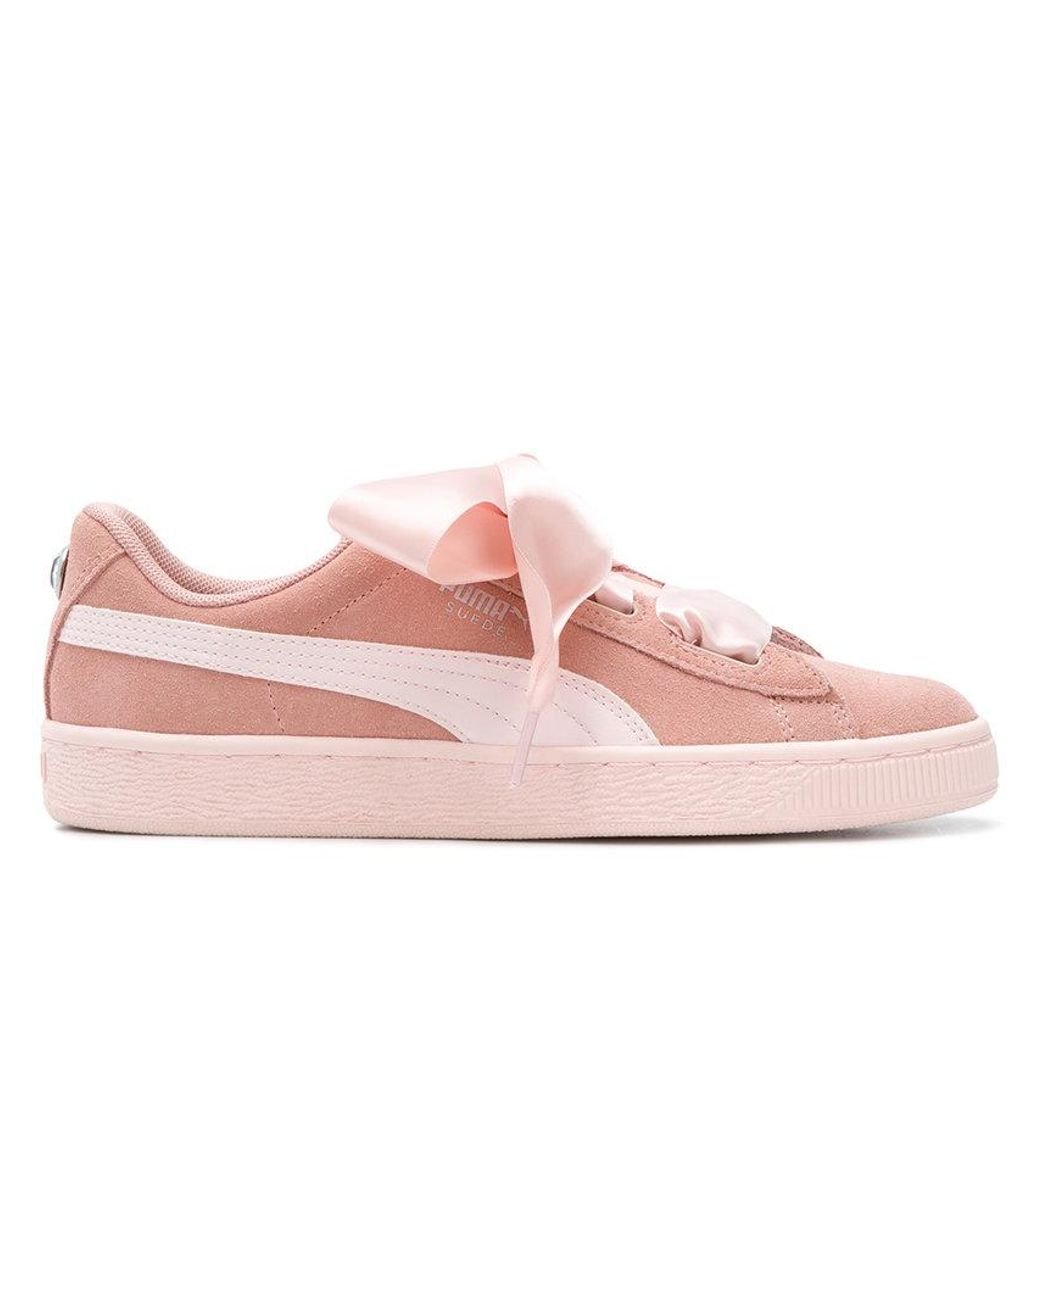 PUMA Ribbon Lace-up Sneakers in Pink | Lyst Australia